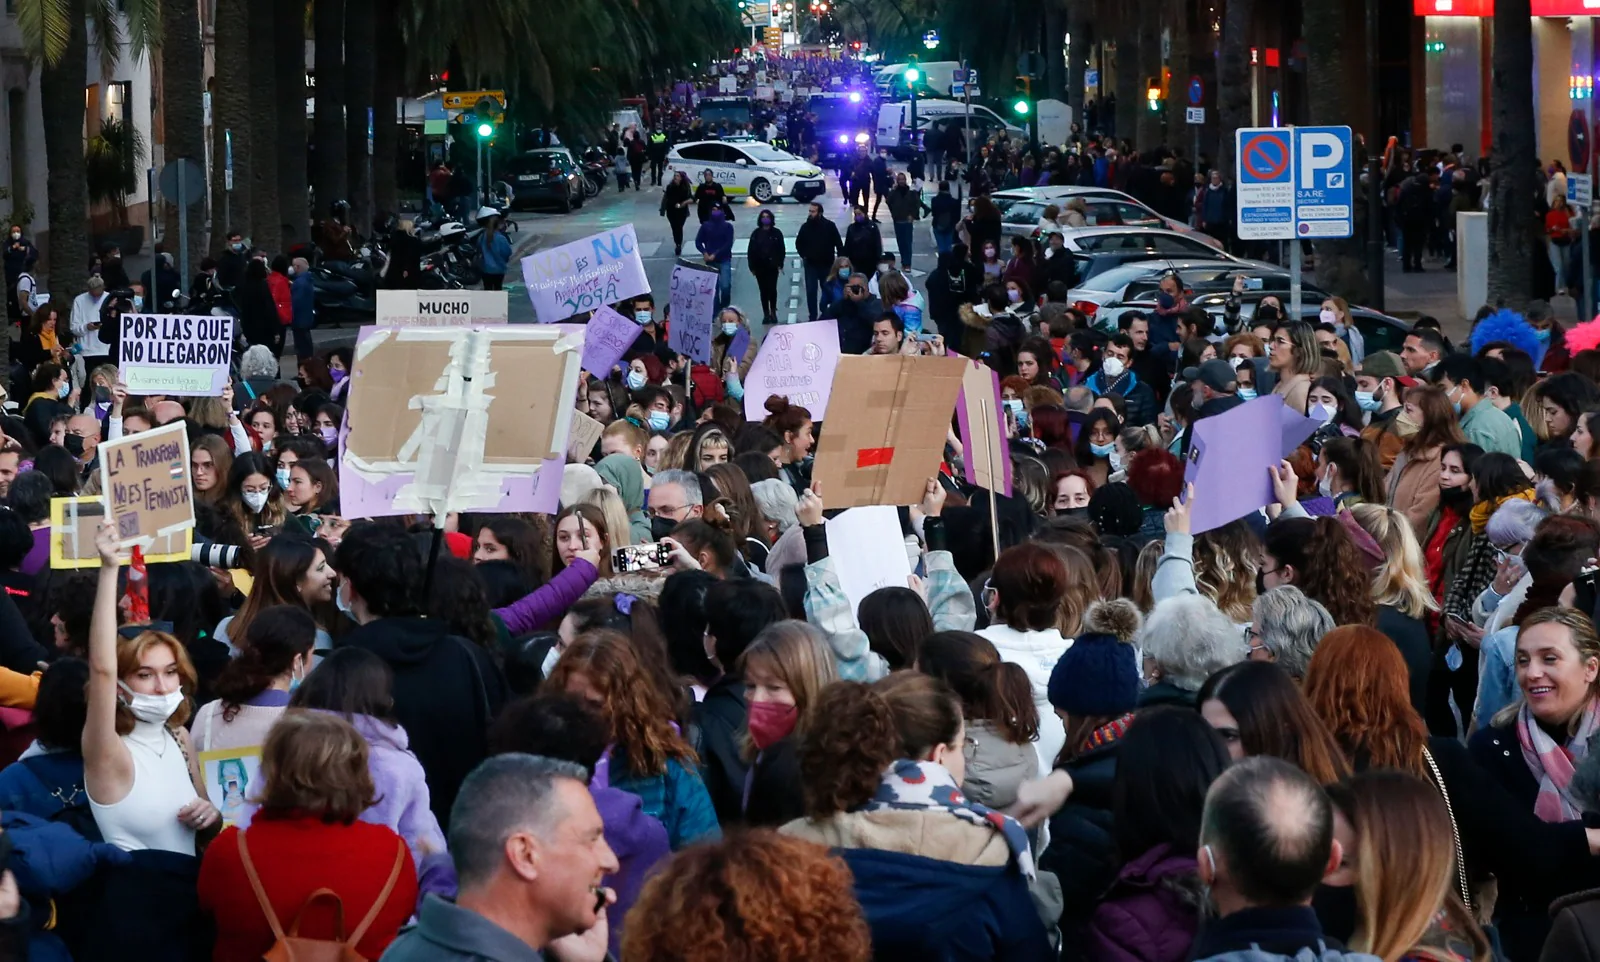 Protestors take to the streets of Malaga on Tuesday, 8 March 2022.